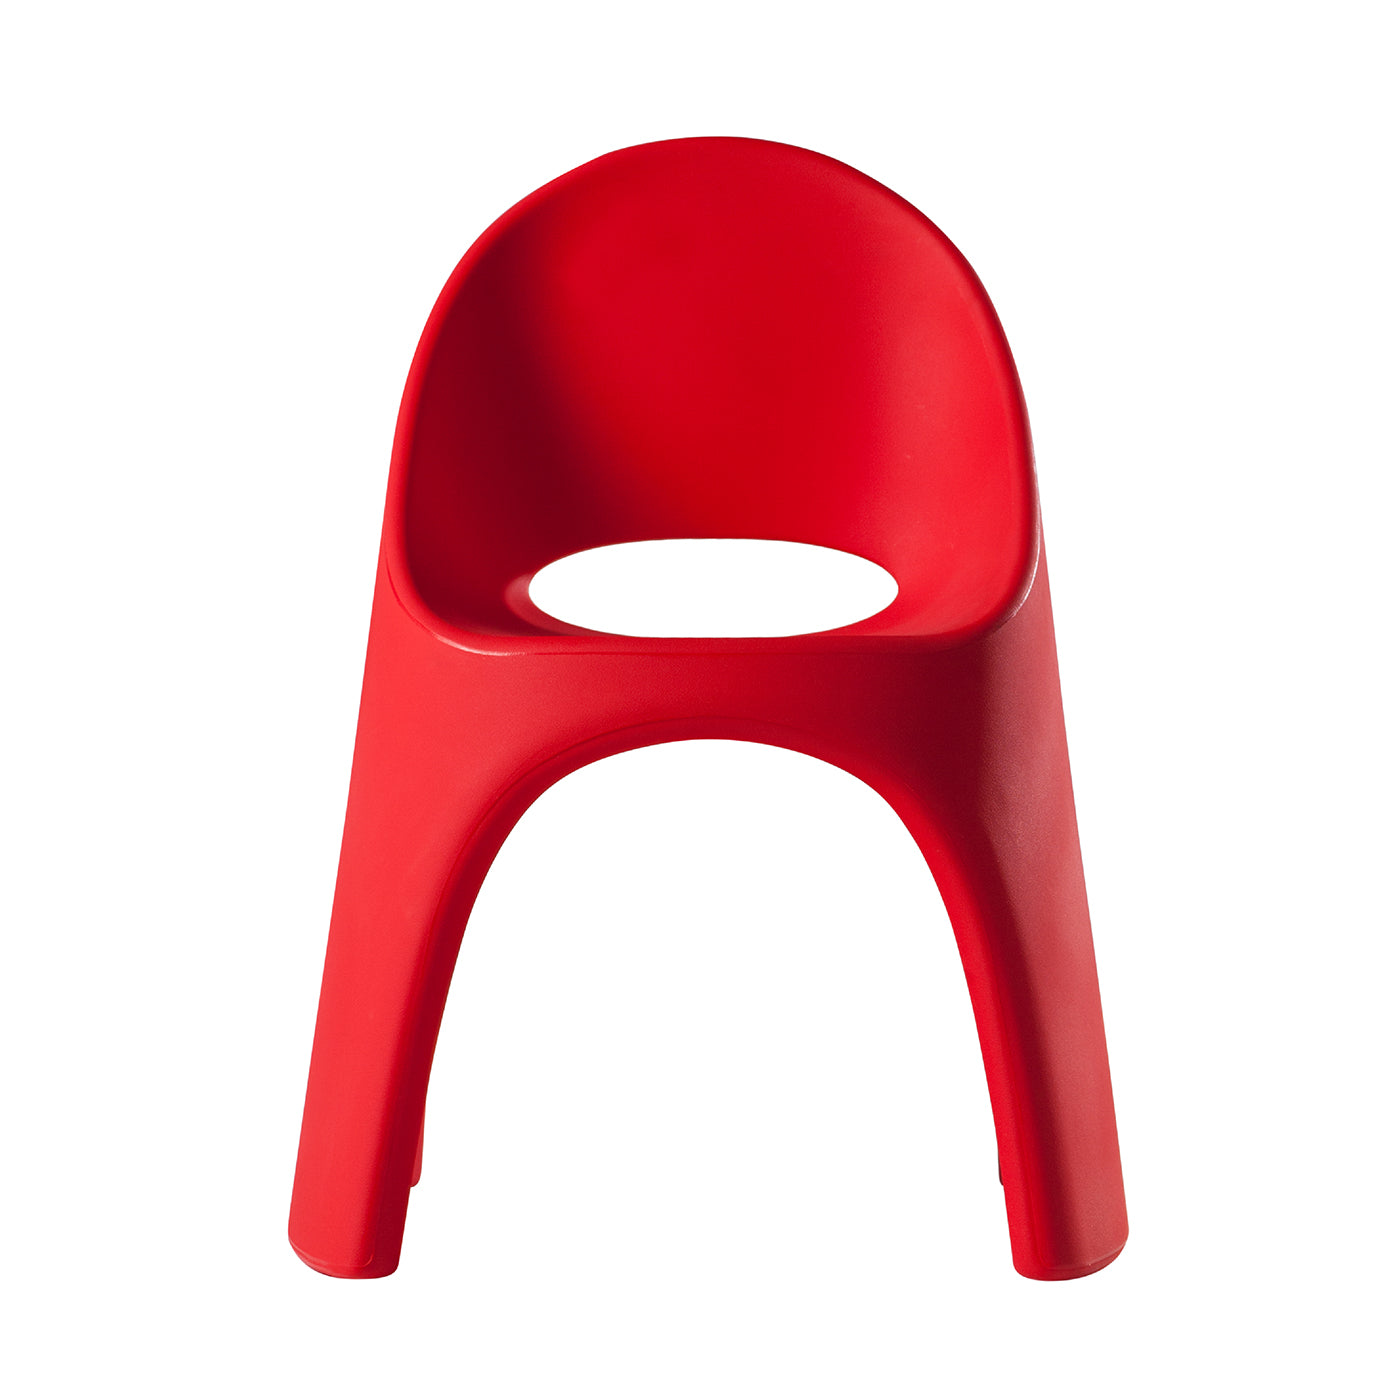 Amelie Red Chair - Alternative view 1